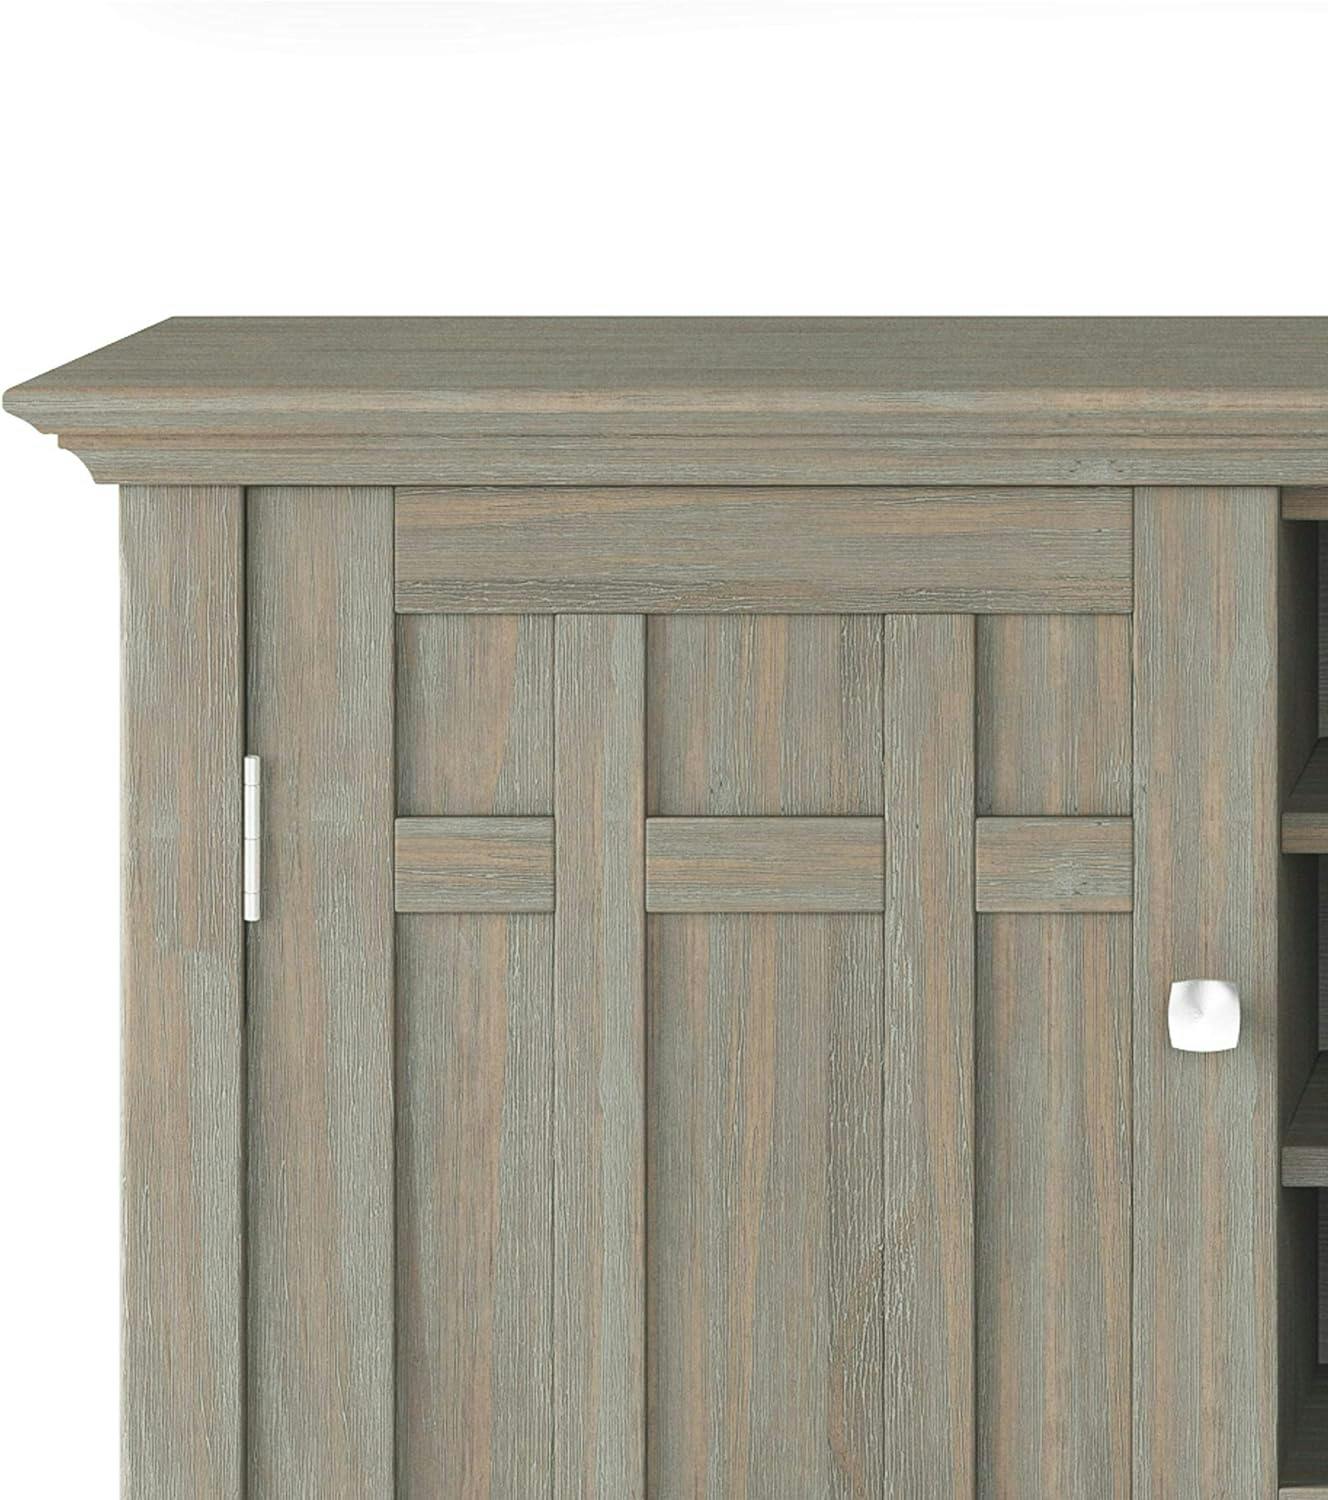 Bedford Transitional 54" Solid Pine Wood Sideboard Buffet and Wine Rack in Distressed Grey